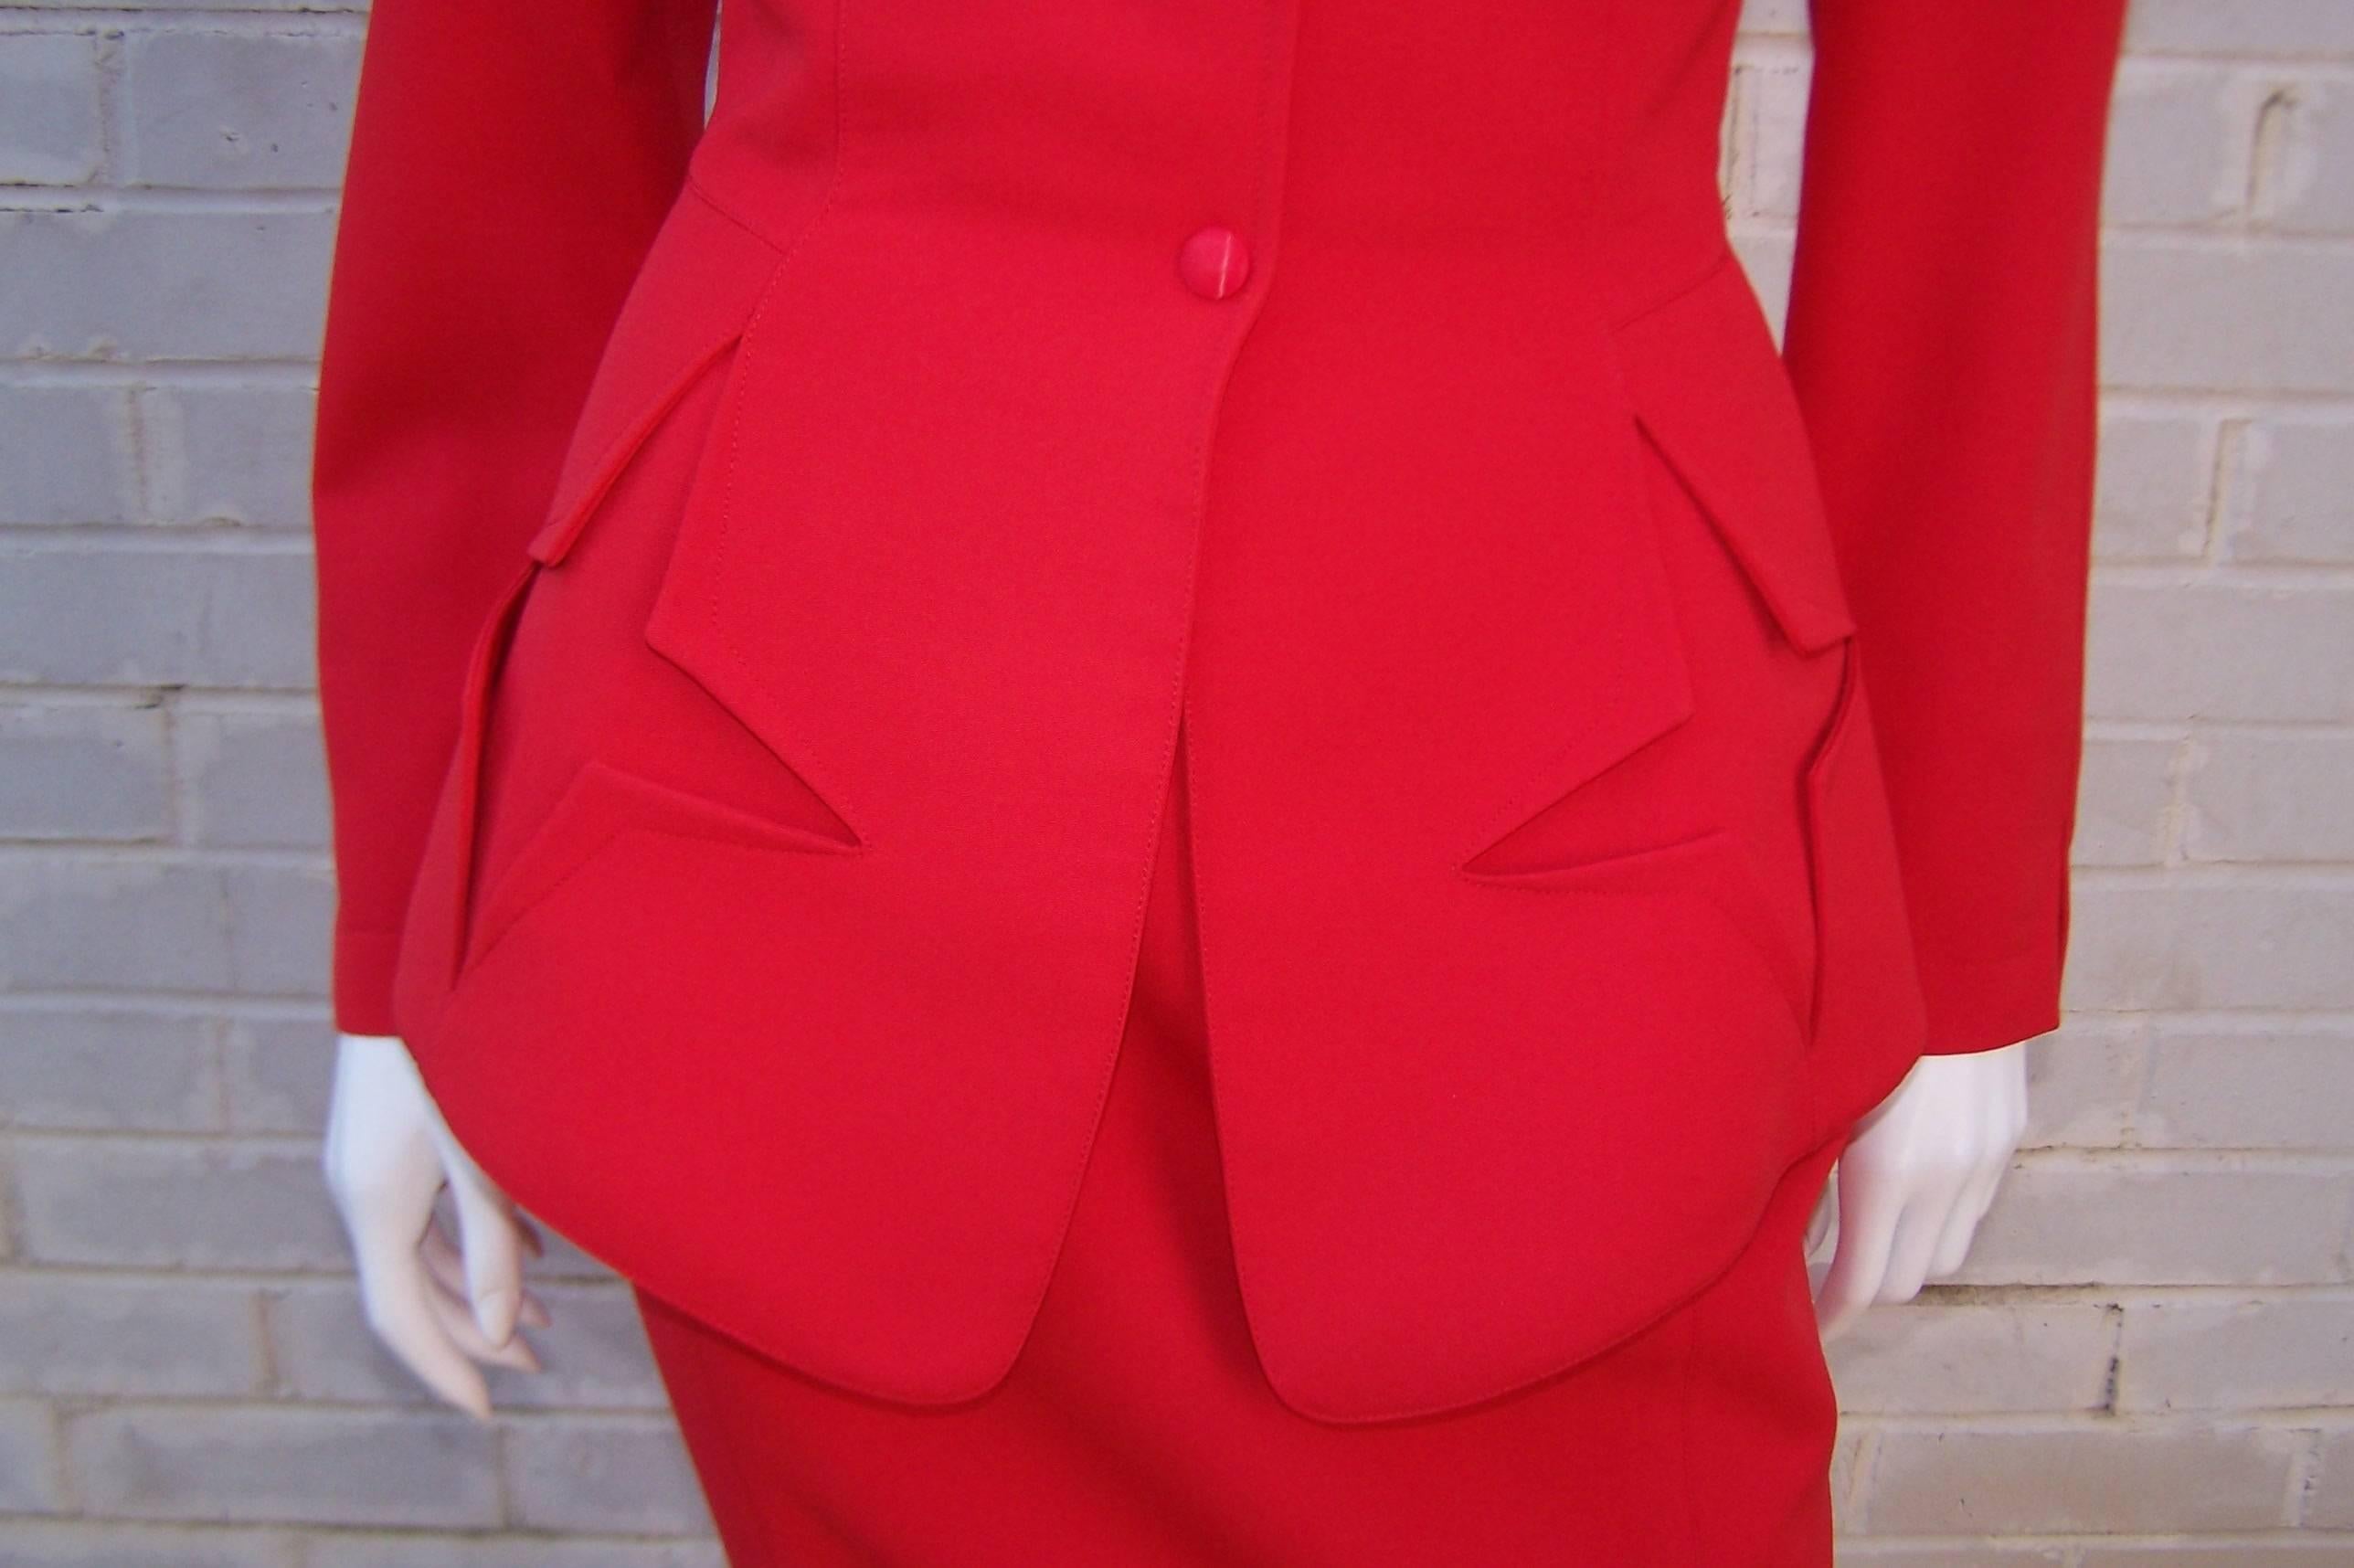 c.1990 Thierry Mugler Fiery Red Suit With Star Pockets & Stylized Skirt 2